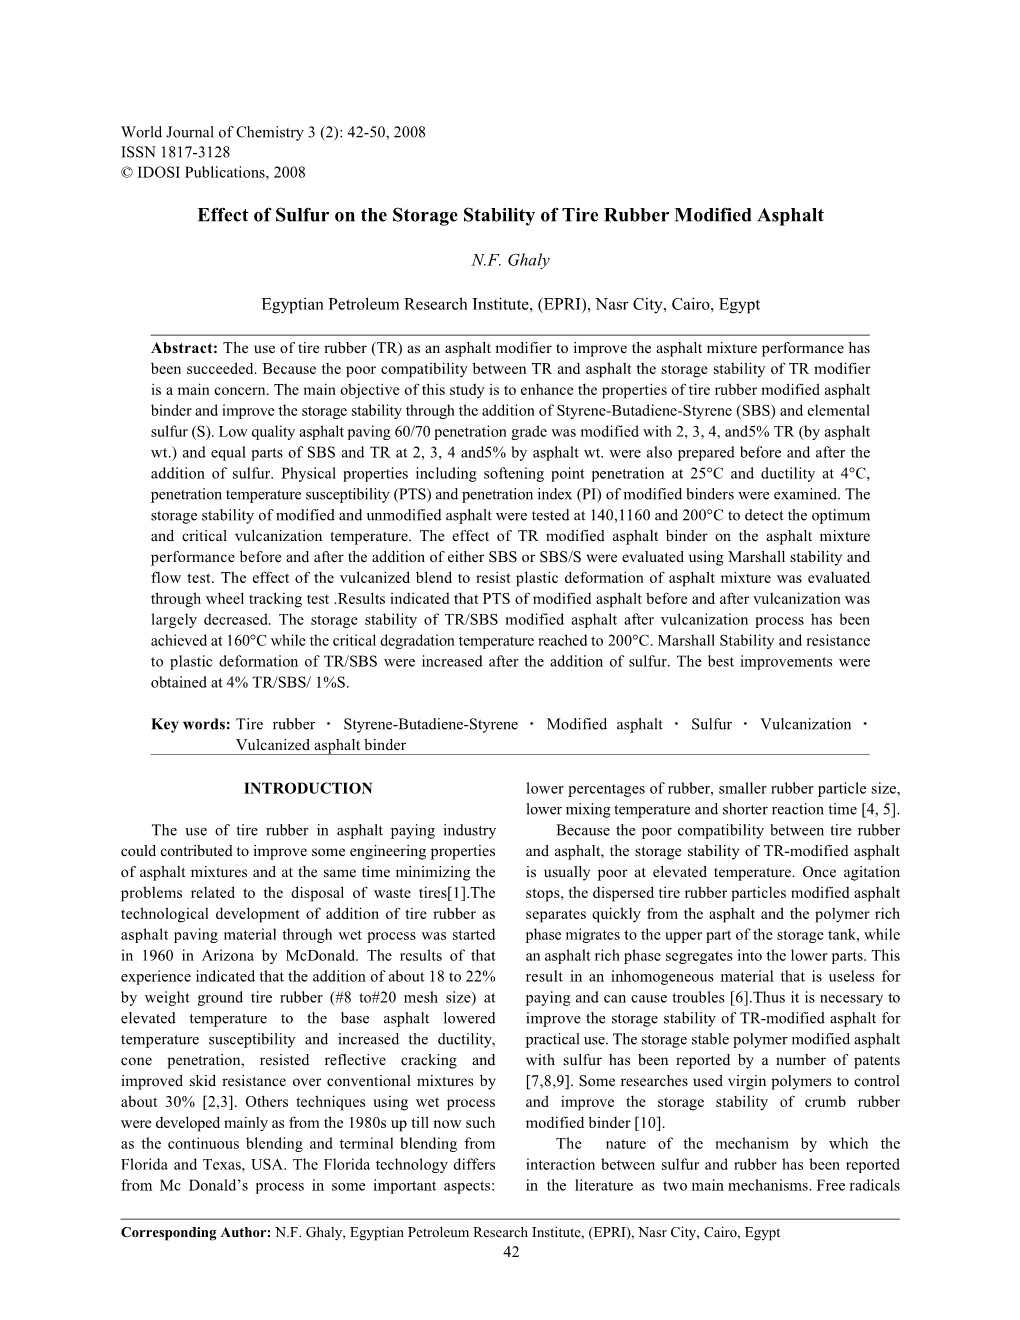 Effect of Sulfur on the Storage Stability of Tire Rubber Modified Asphalt